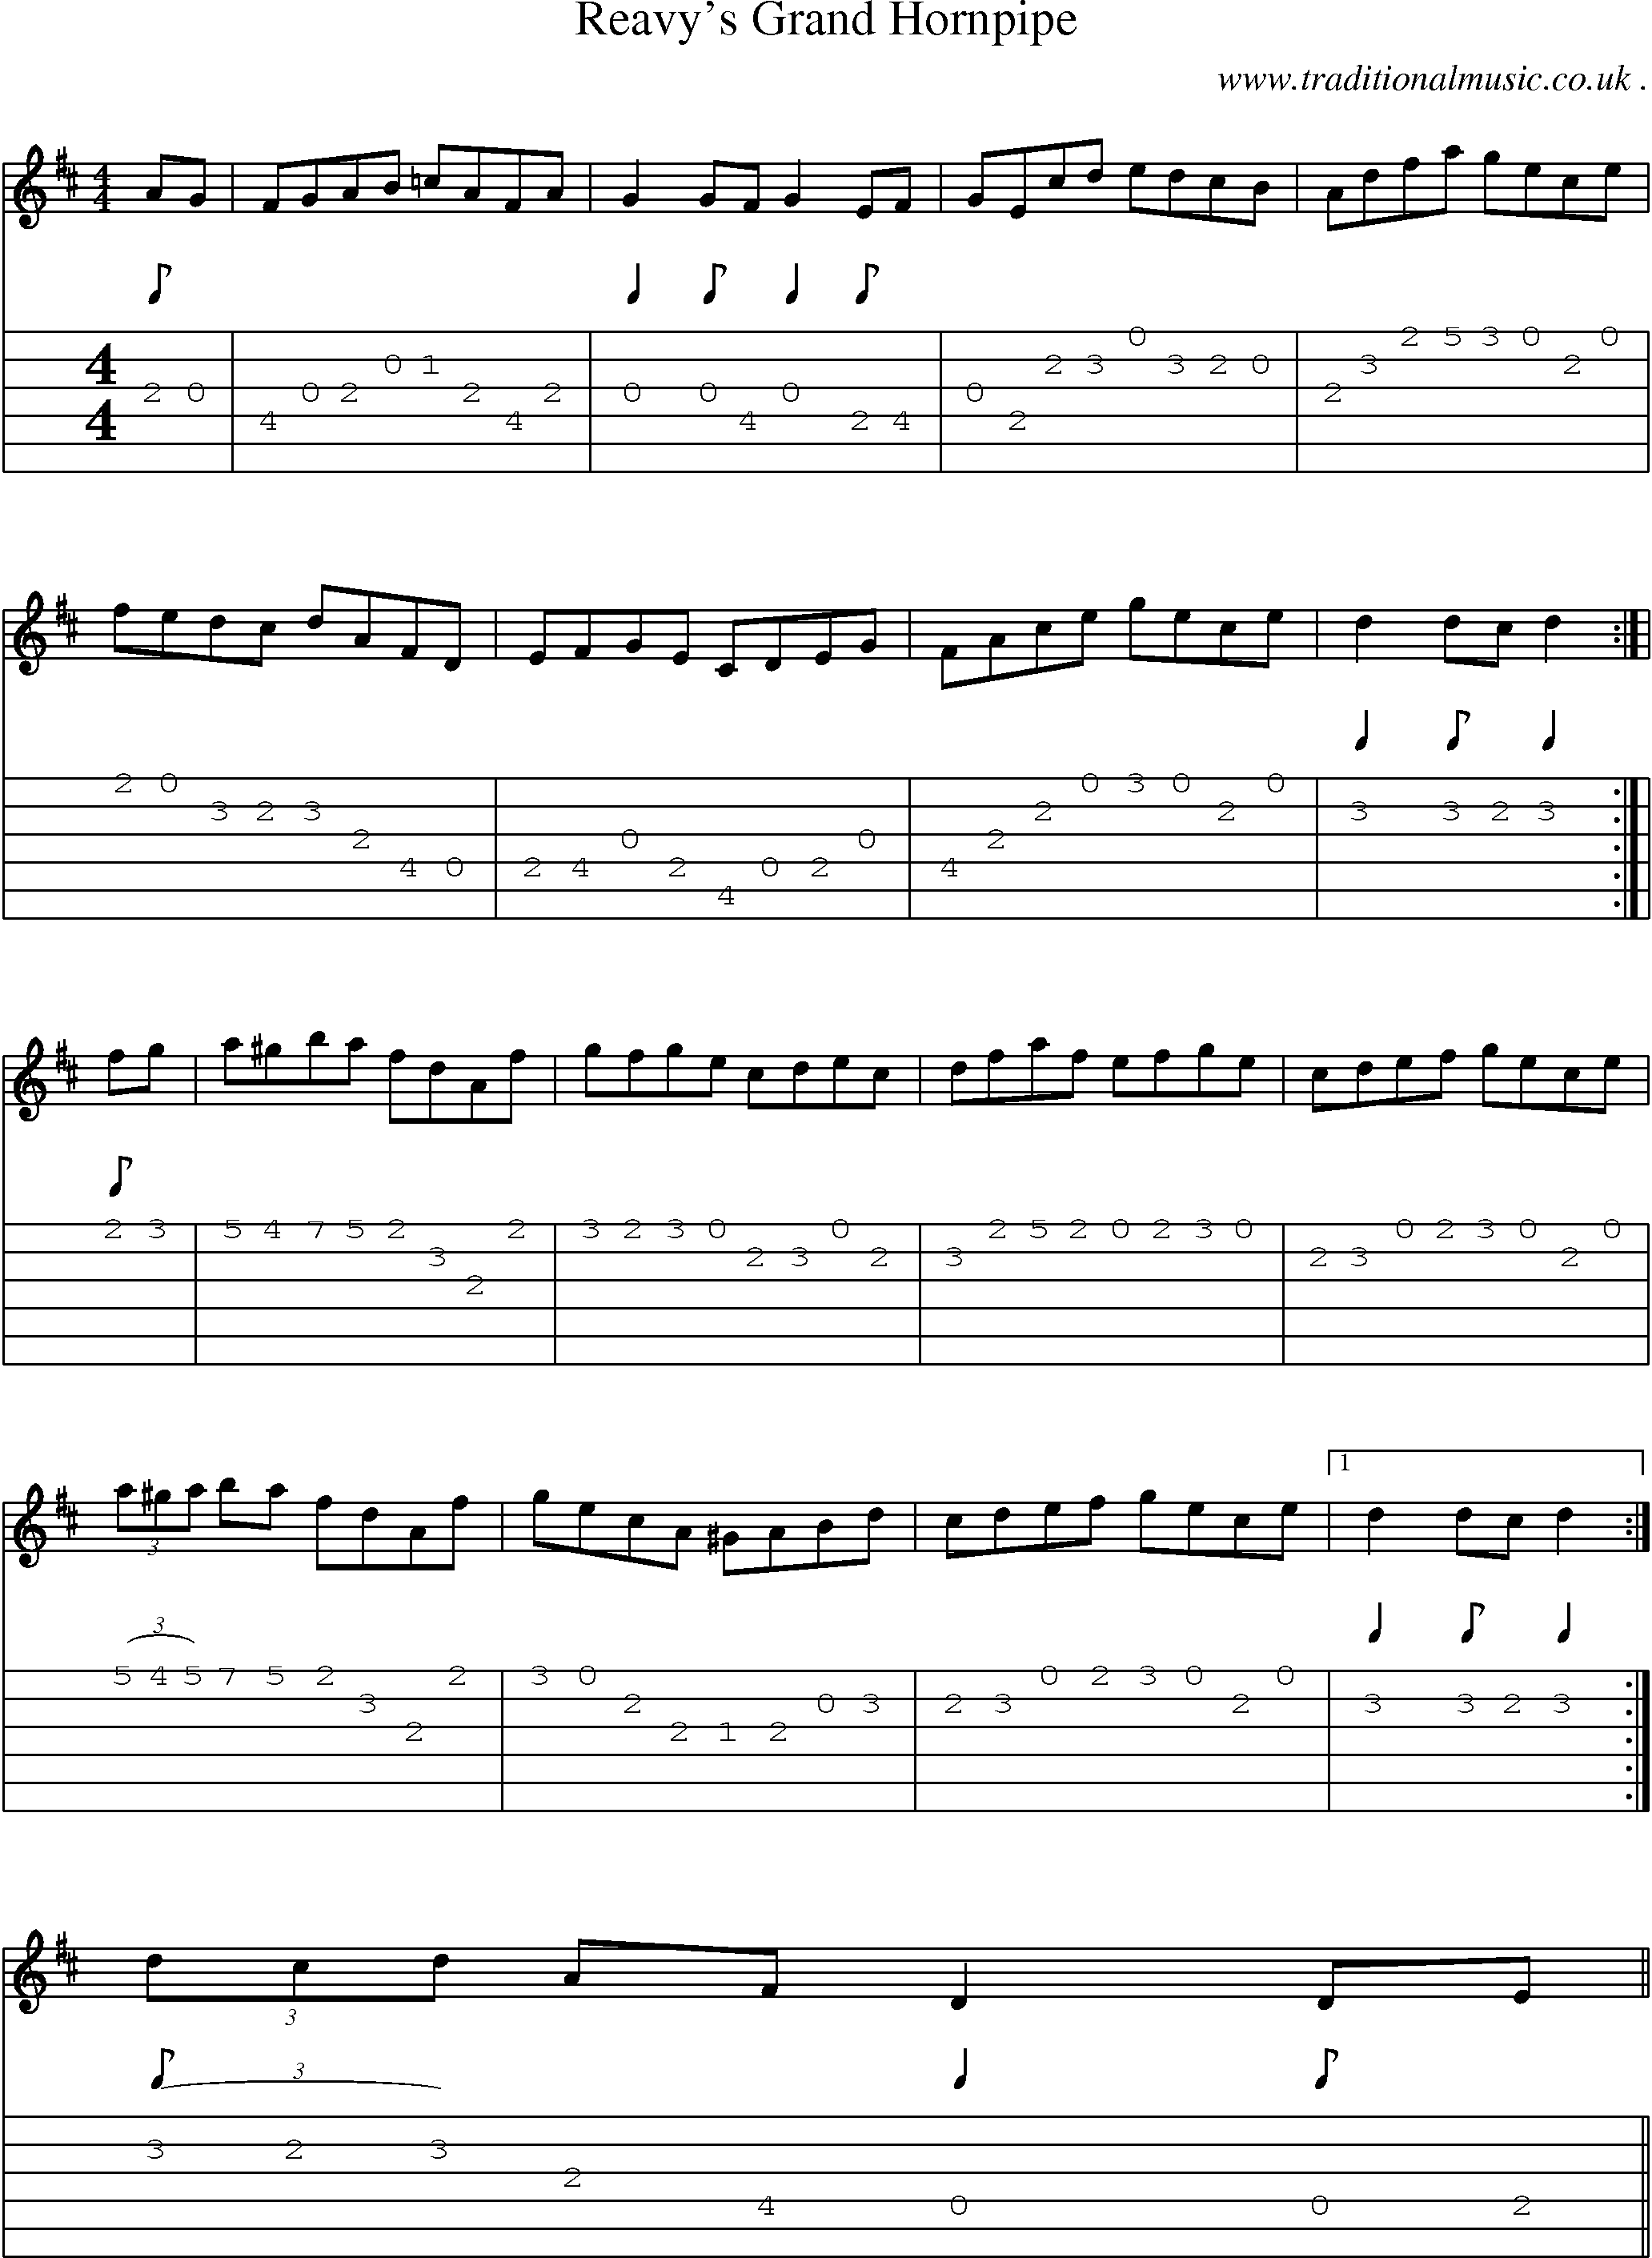 Sheet-Music and Guitar Tabs for Reavys Grand Hornpipe